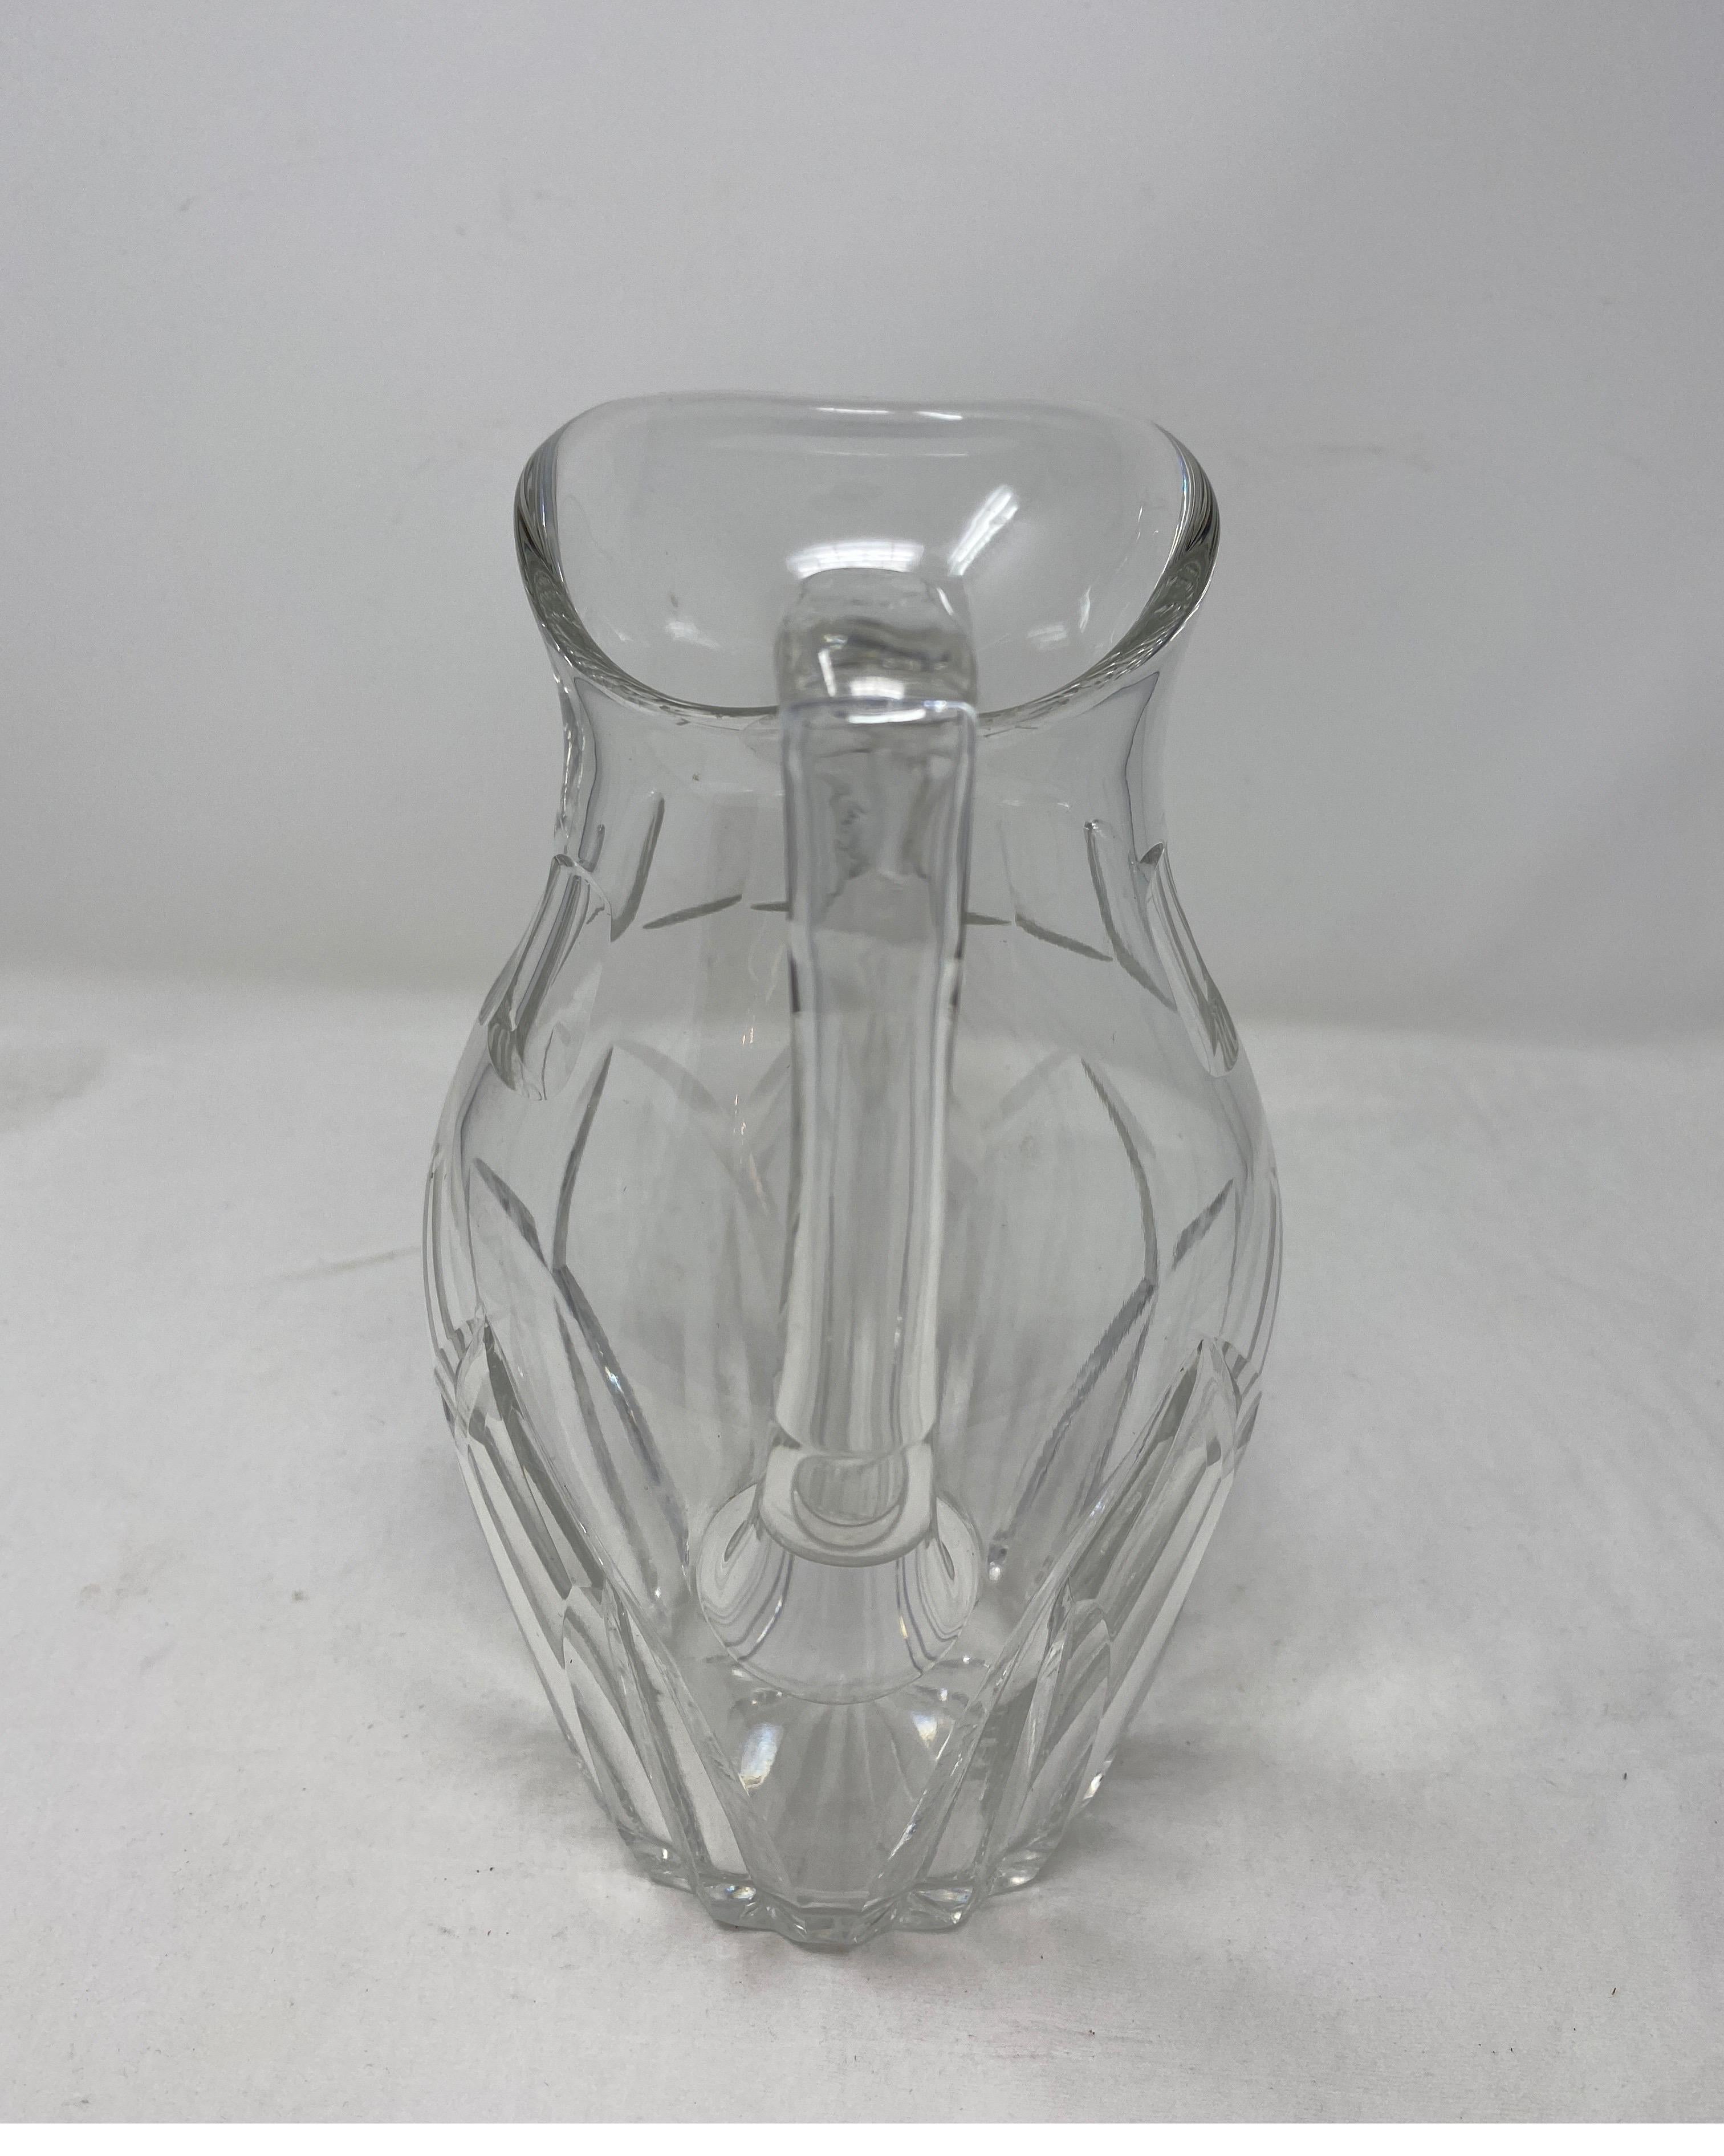 Antique crystal pitcher, 19th century.

5